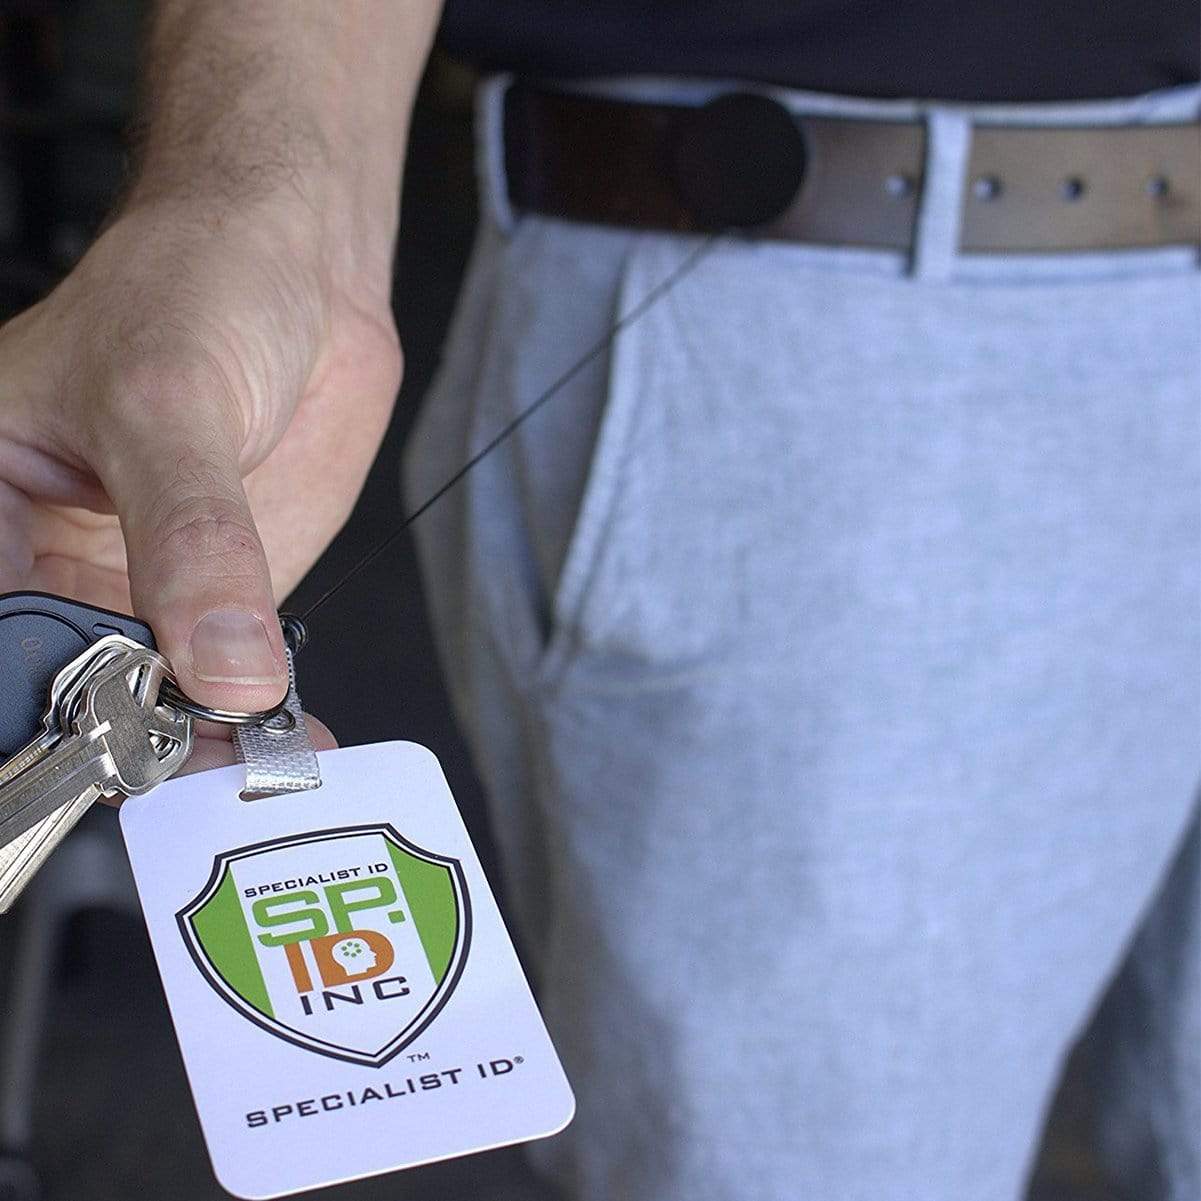 A person holding a Black Chrome Heavy Duty Badge Reel with Belt Clip (2120-3300) with keys attached, featuring a badge with a "Specialist ID Inc" logo. The retractable reel is clipped to the belt clip on their brown belt. They are wearing light gray pants.